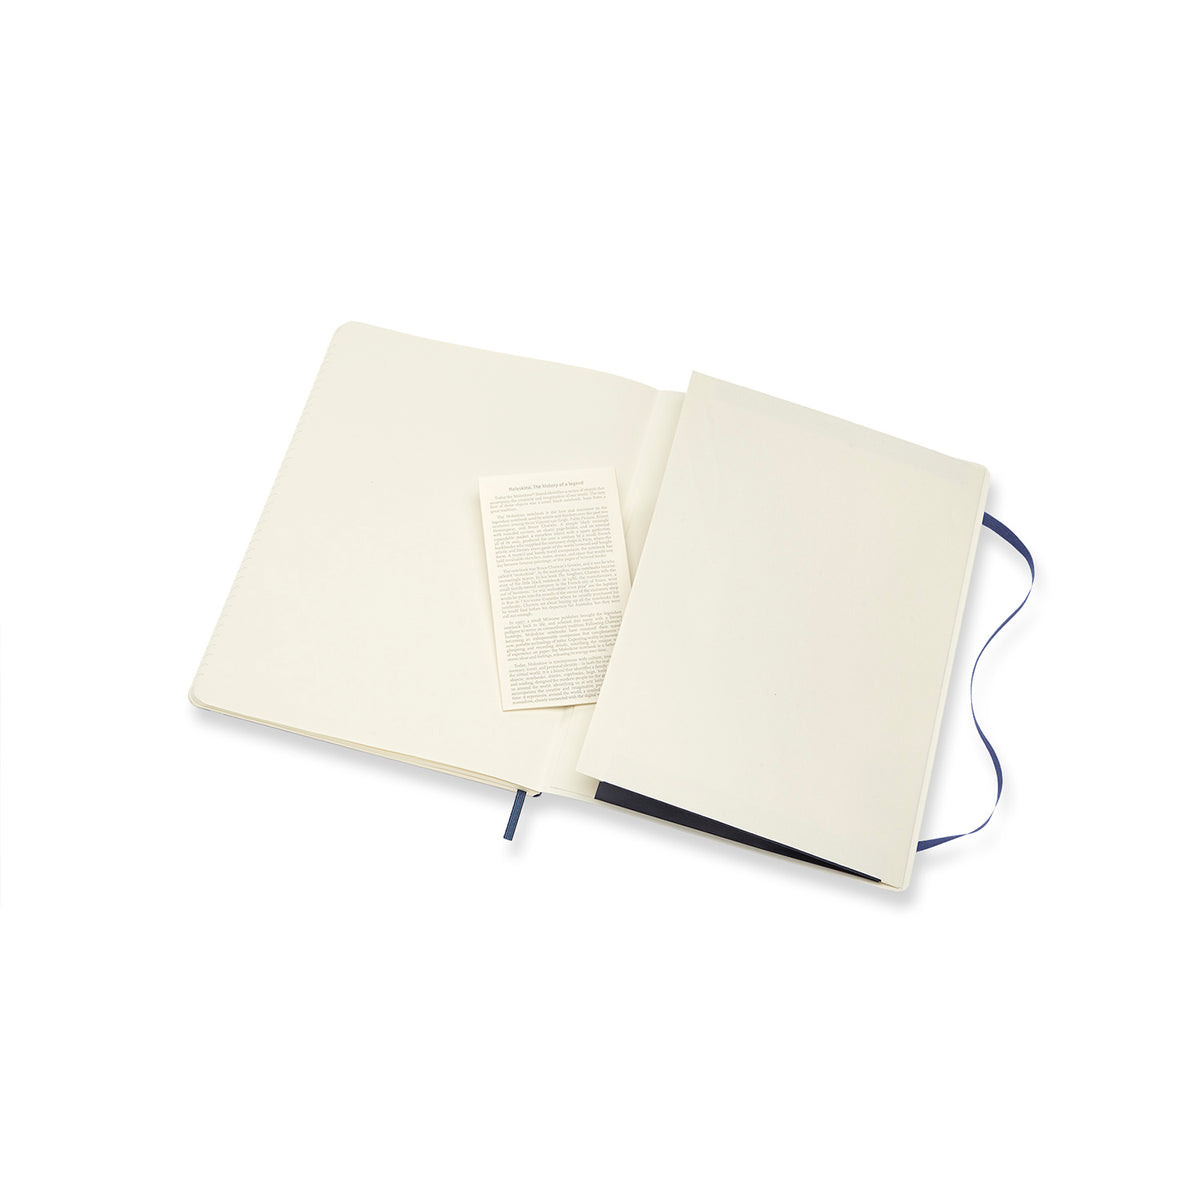 Moleskine - Classic Soft Cover Notebook - Ruled - Extra Large - Sapphire Blue